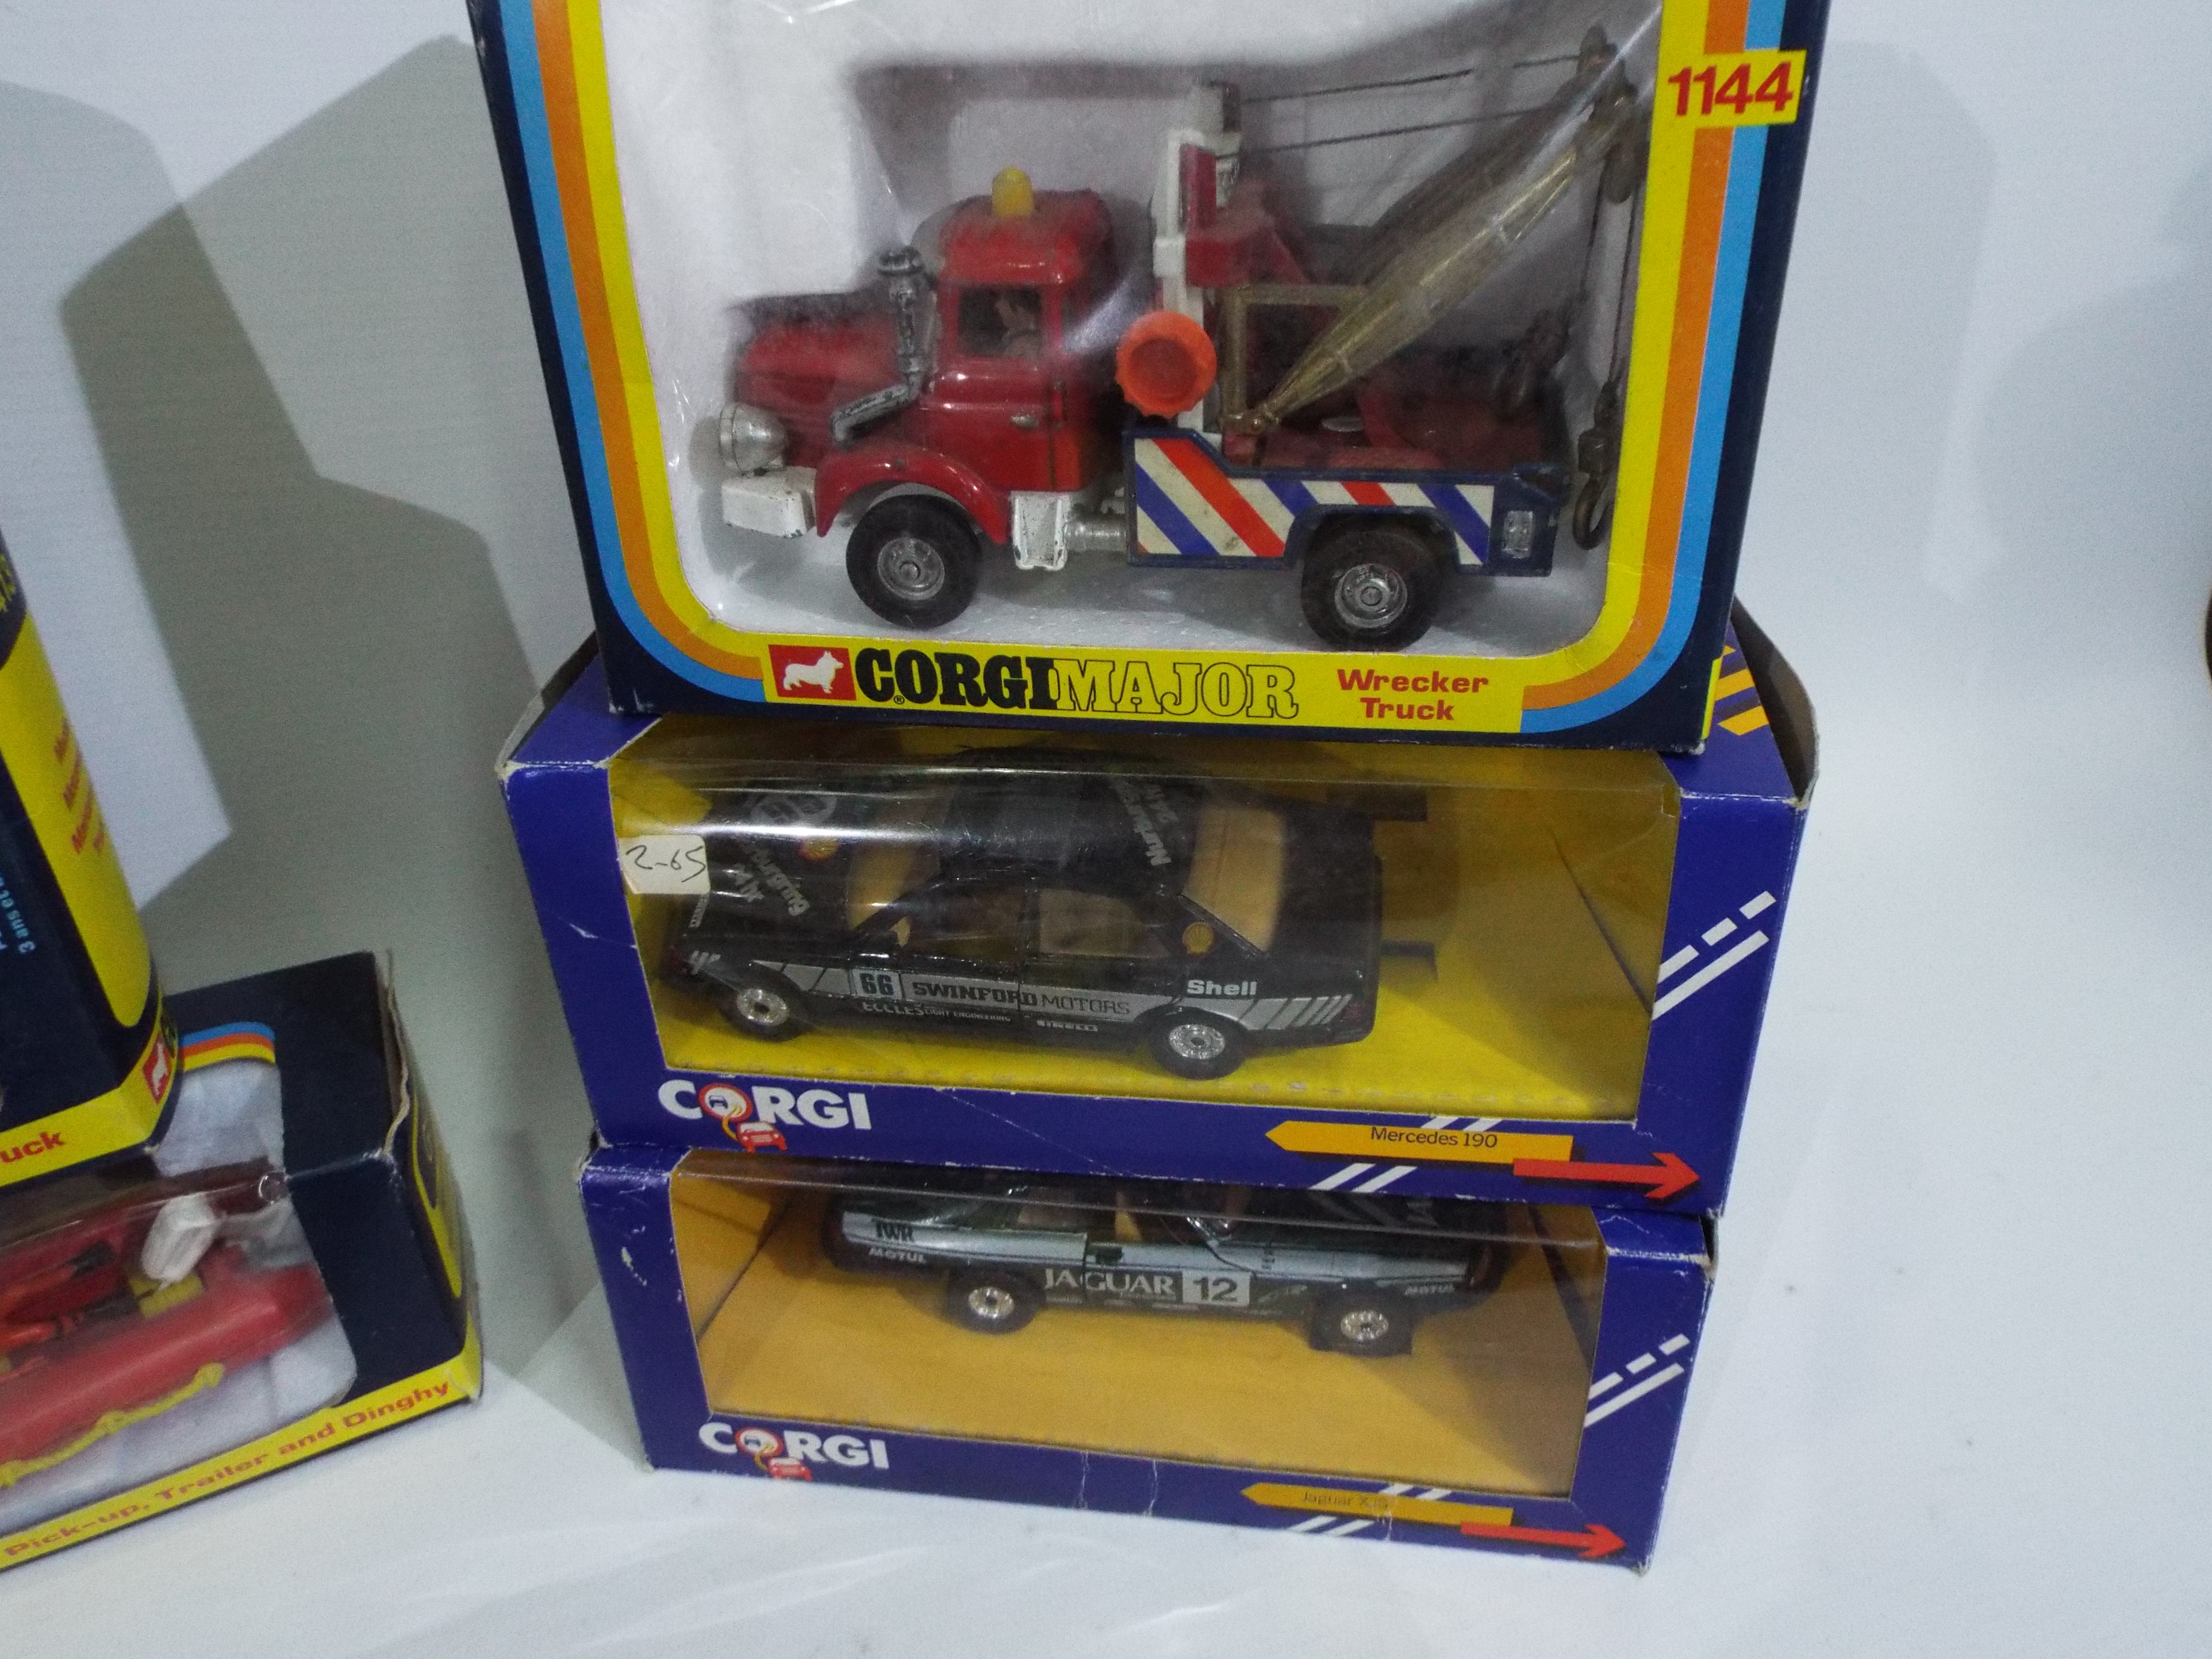 Corgi - 16 x boxed die-cast Corgi vehicles - Lot includes a 320 Ford Mustang, - Image 6 of 7